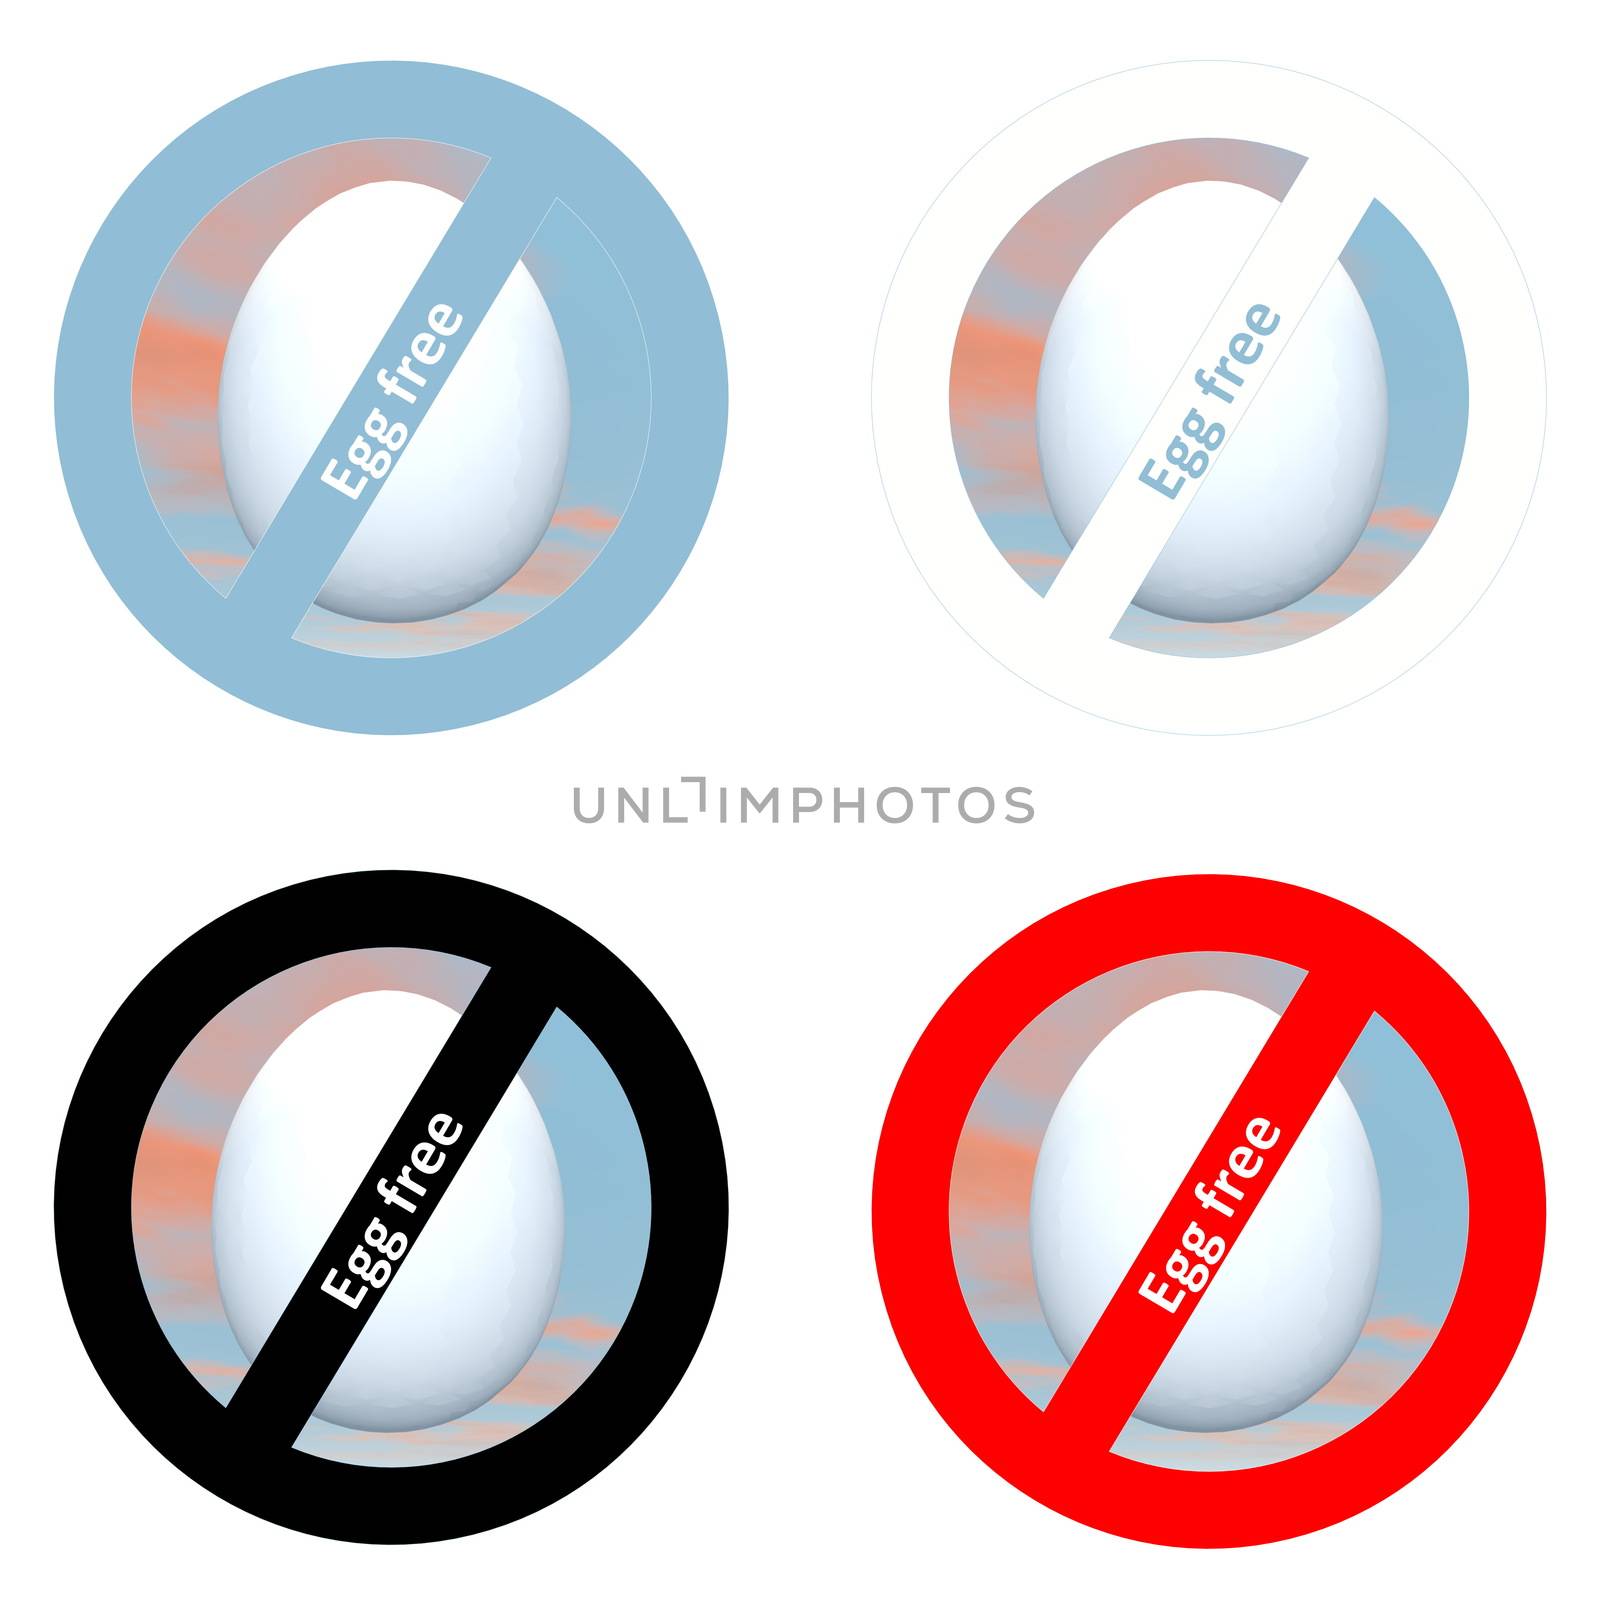 Stickers for egg free products by Elenaphotos21